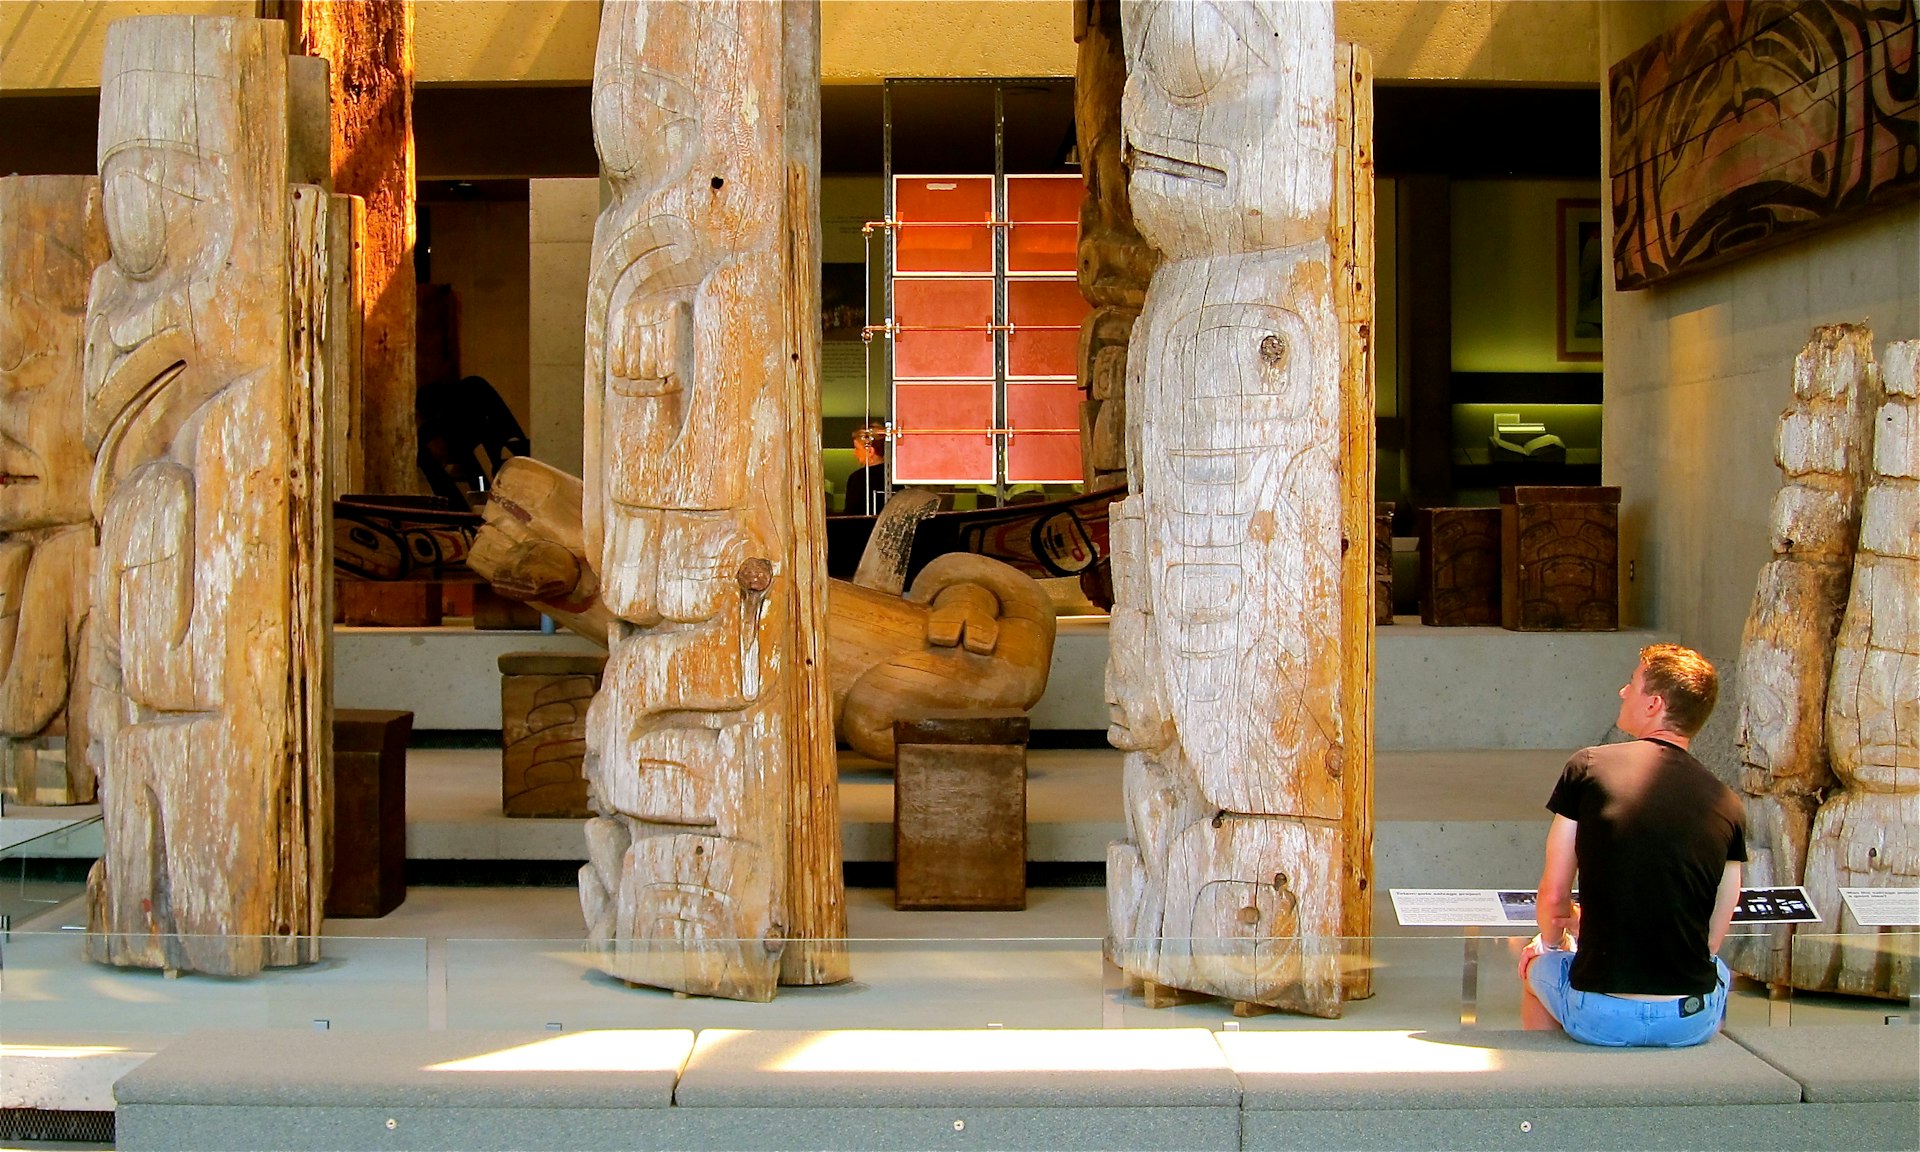 Studying the ancient totem poles at the Museum of Anthropology © John Lee / Lonely Planet